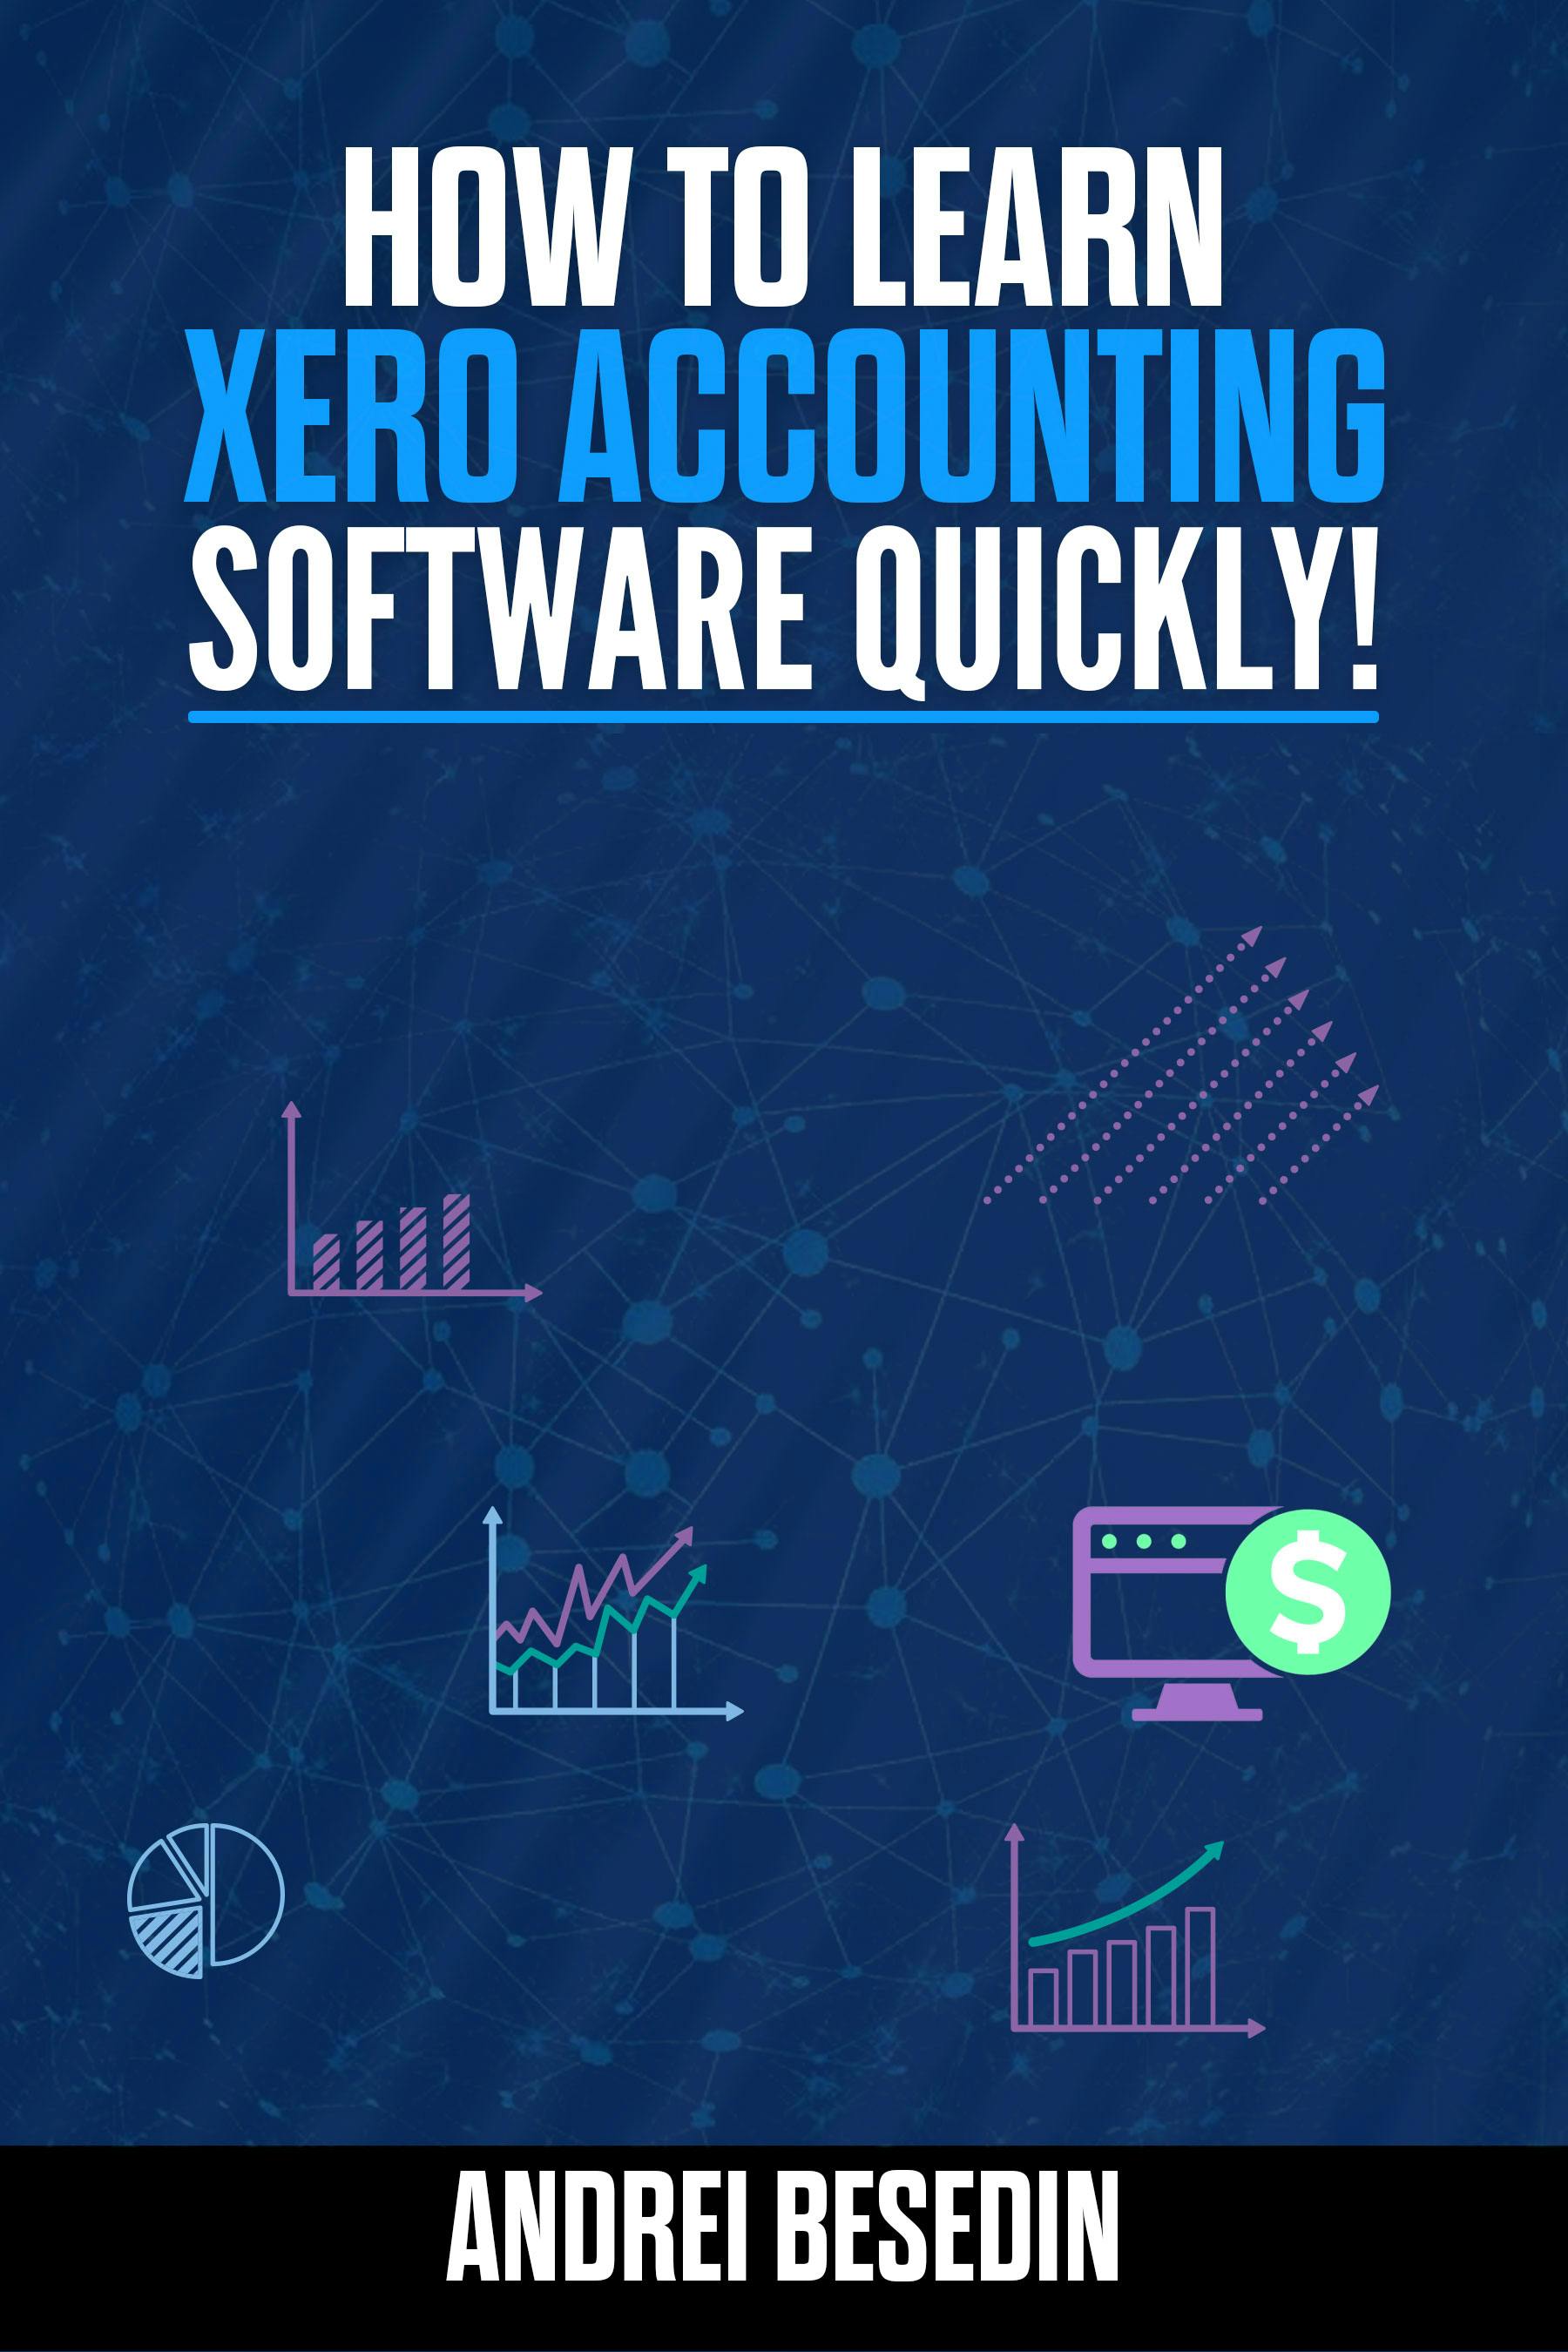 How To Learn Xero Accounting Software Quickly! - Andrei Besedin